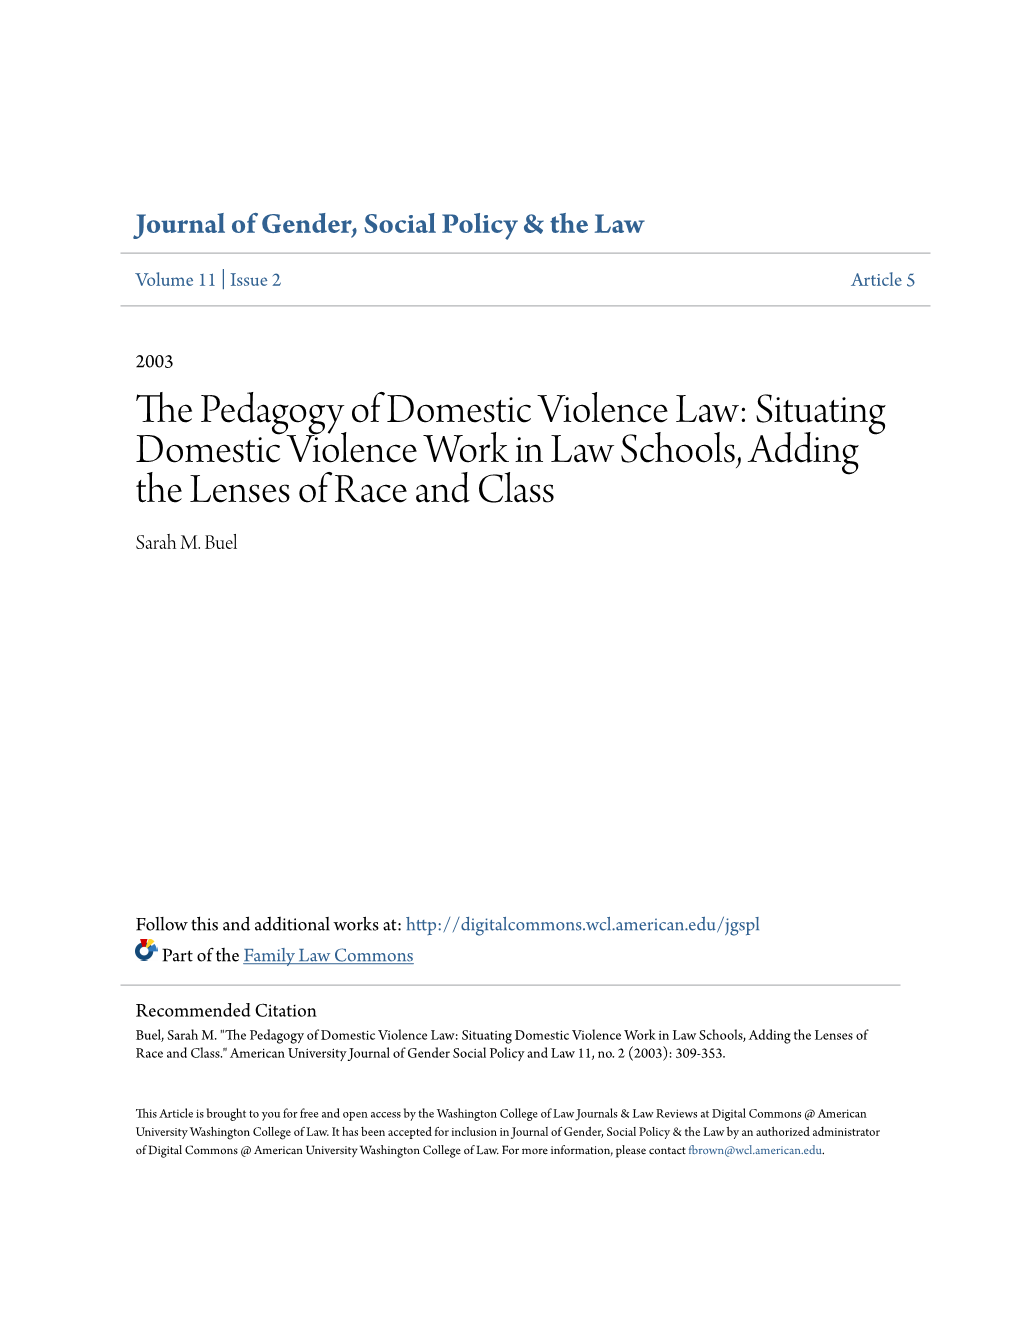 Situating Domestic Violence Work in Law Schools, Adding the Lenses of Race and Class Sarah M